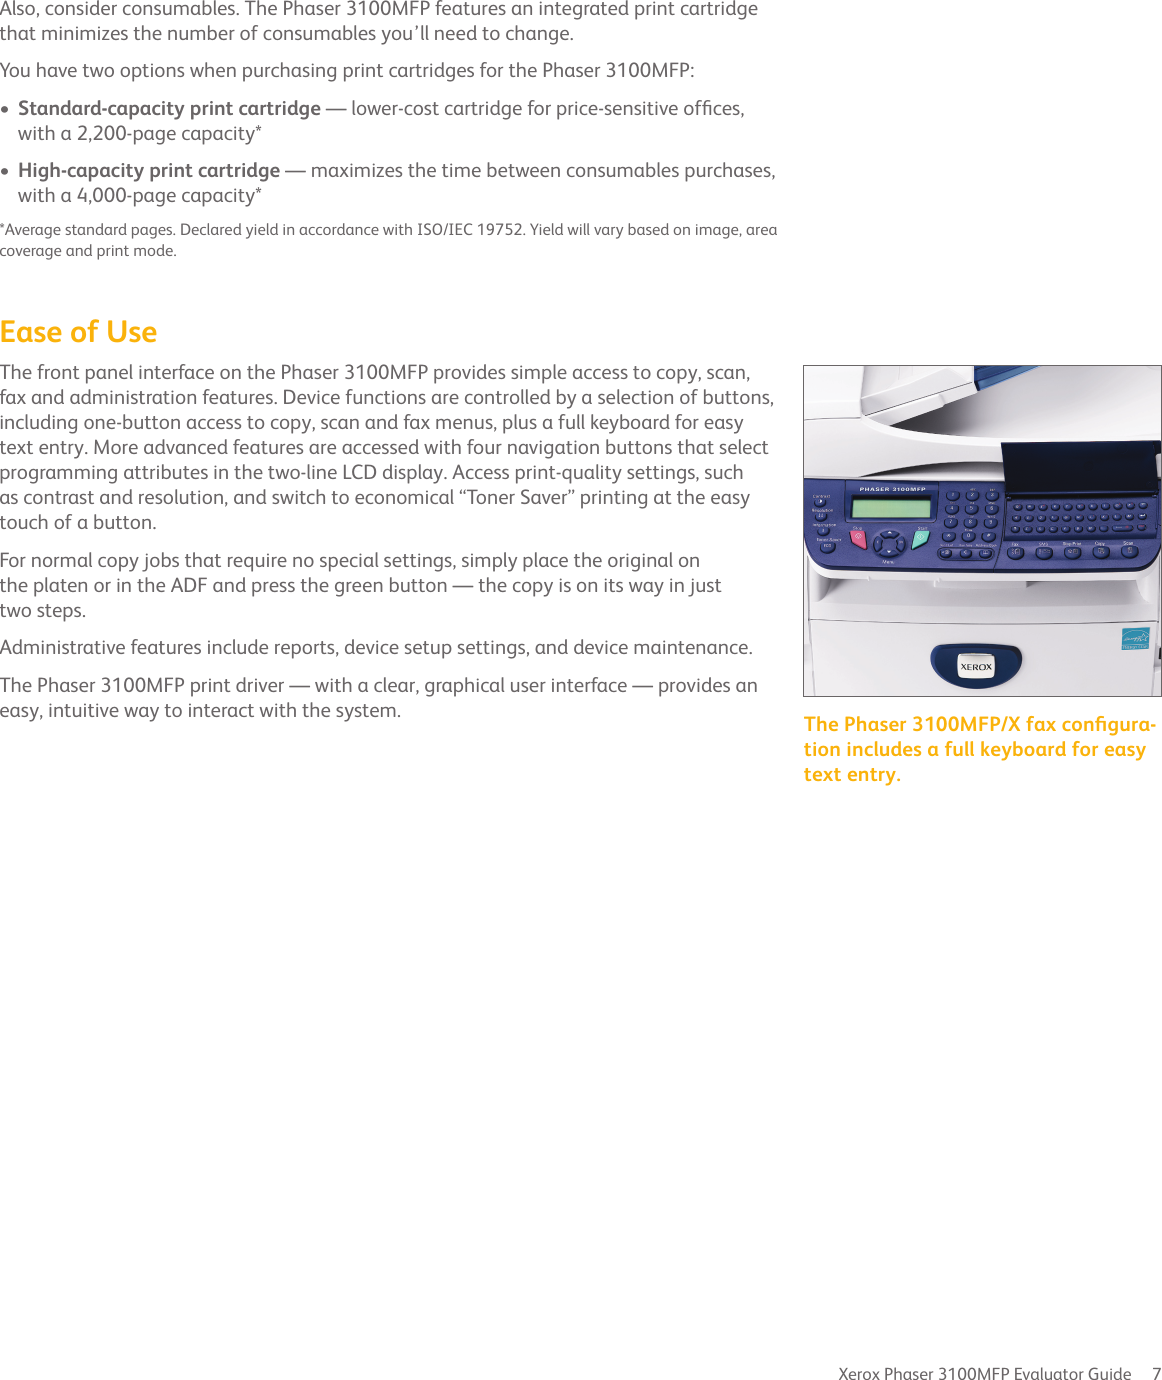 Xerox Phaser 3100mfp Users Manual Evaluator Guide